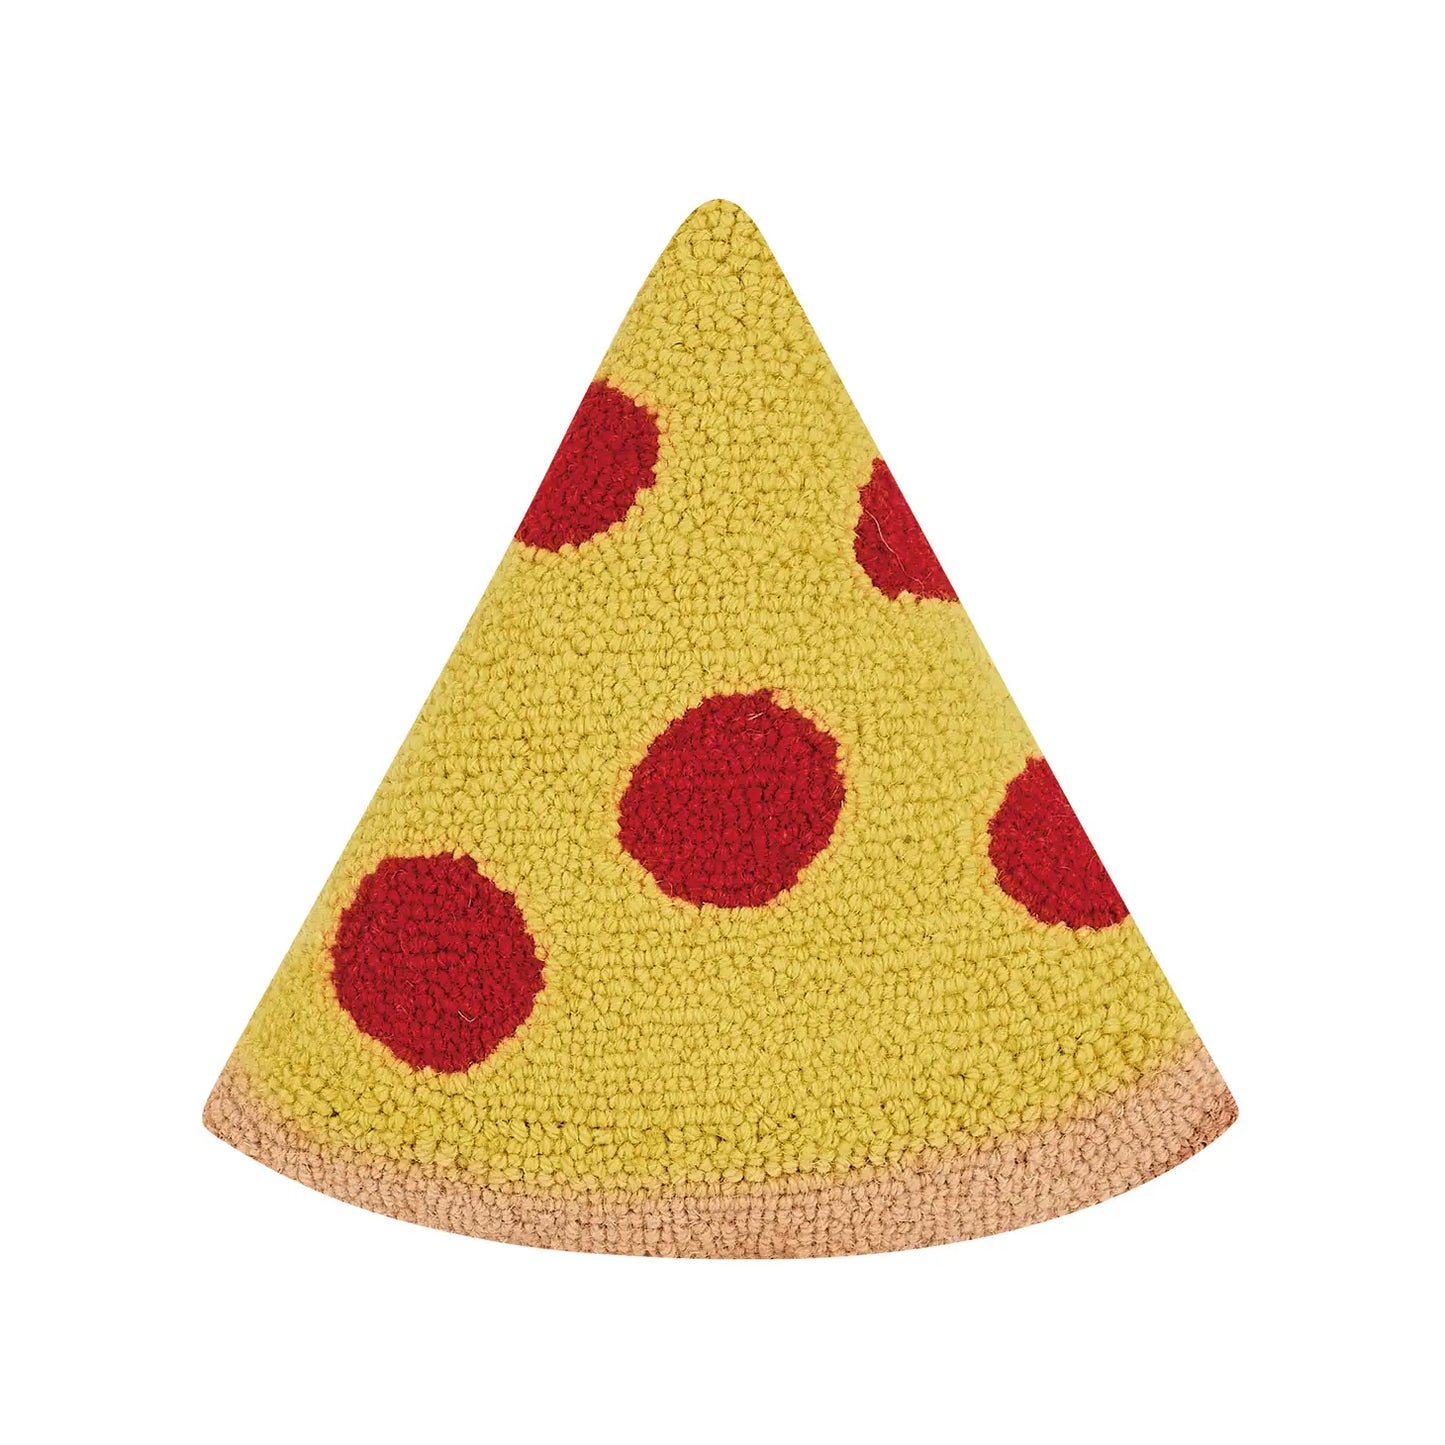 Pizza Slice Hooked Wool 12" x 12" Throw Pillow